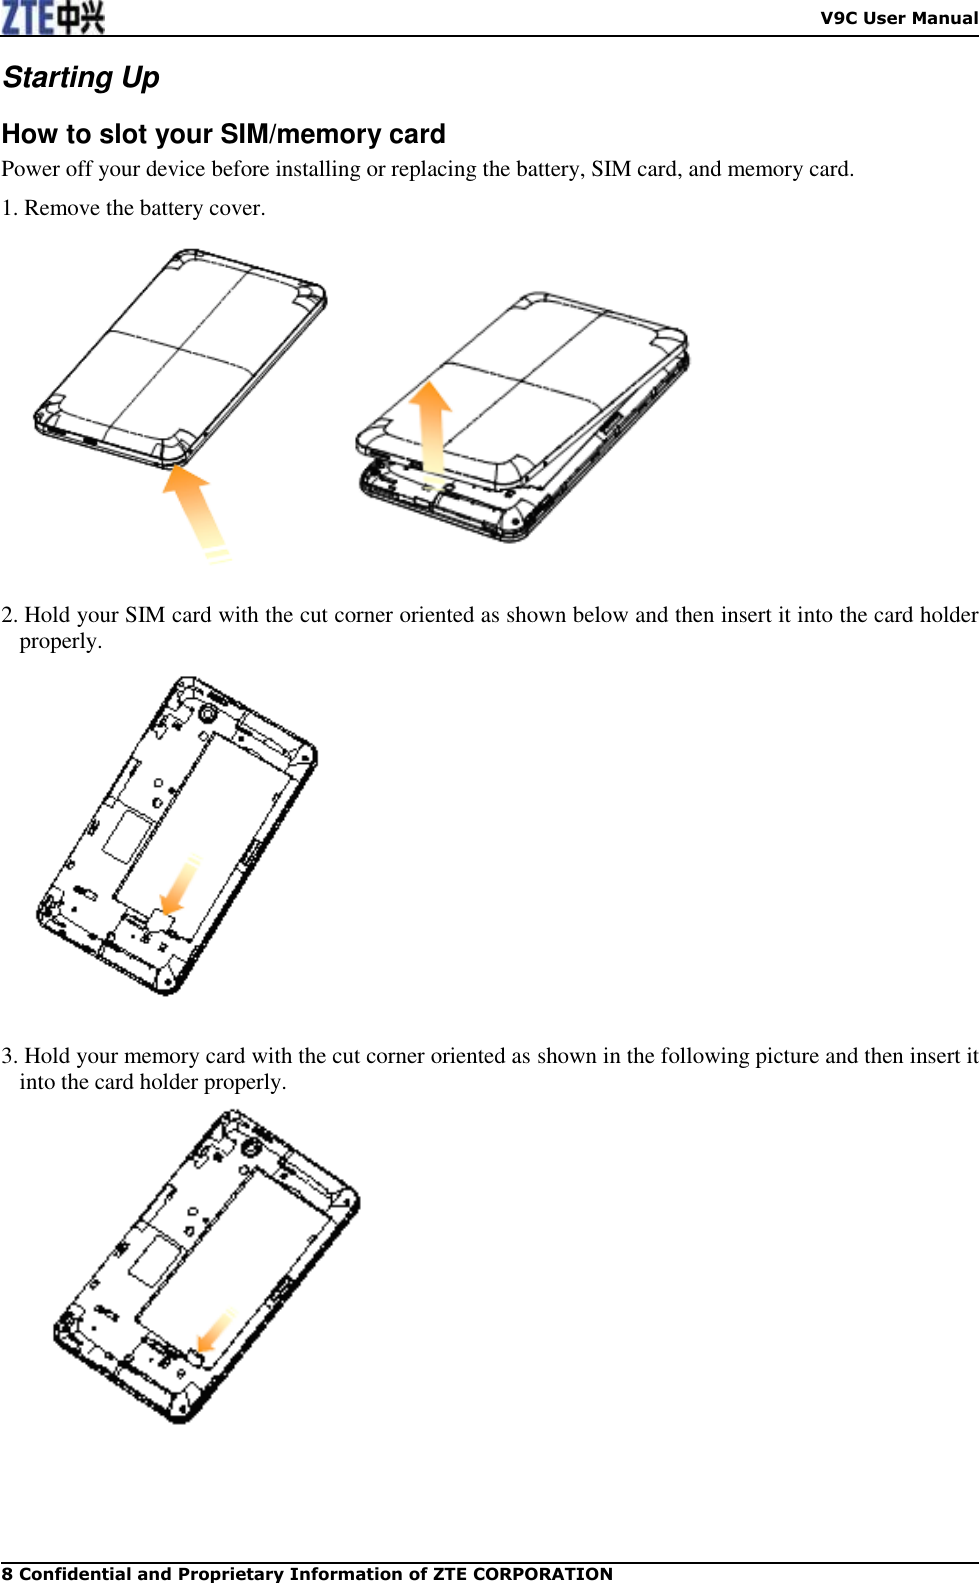    V9C User Manual 8 Confidential and Proprietary Information of ZTE CORPORATION Starting Up How to slot your SIM/memory card Power off your device before installing or replacing the battery, SIM card, and memory card.   1. Remove the battery cover.   2. Hold your SIM card with the cut corner oriented as shown below and then insert it into the card holder properly.     3. Hold your memory card with the cut corner oriented as shown in the following picture and then insert it into the card holder properly.  